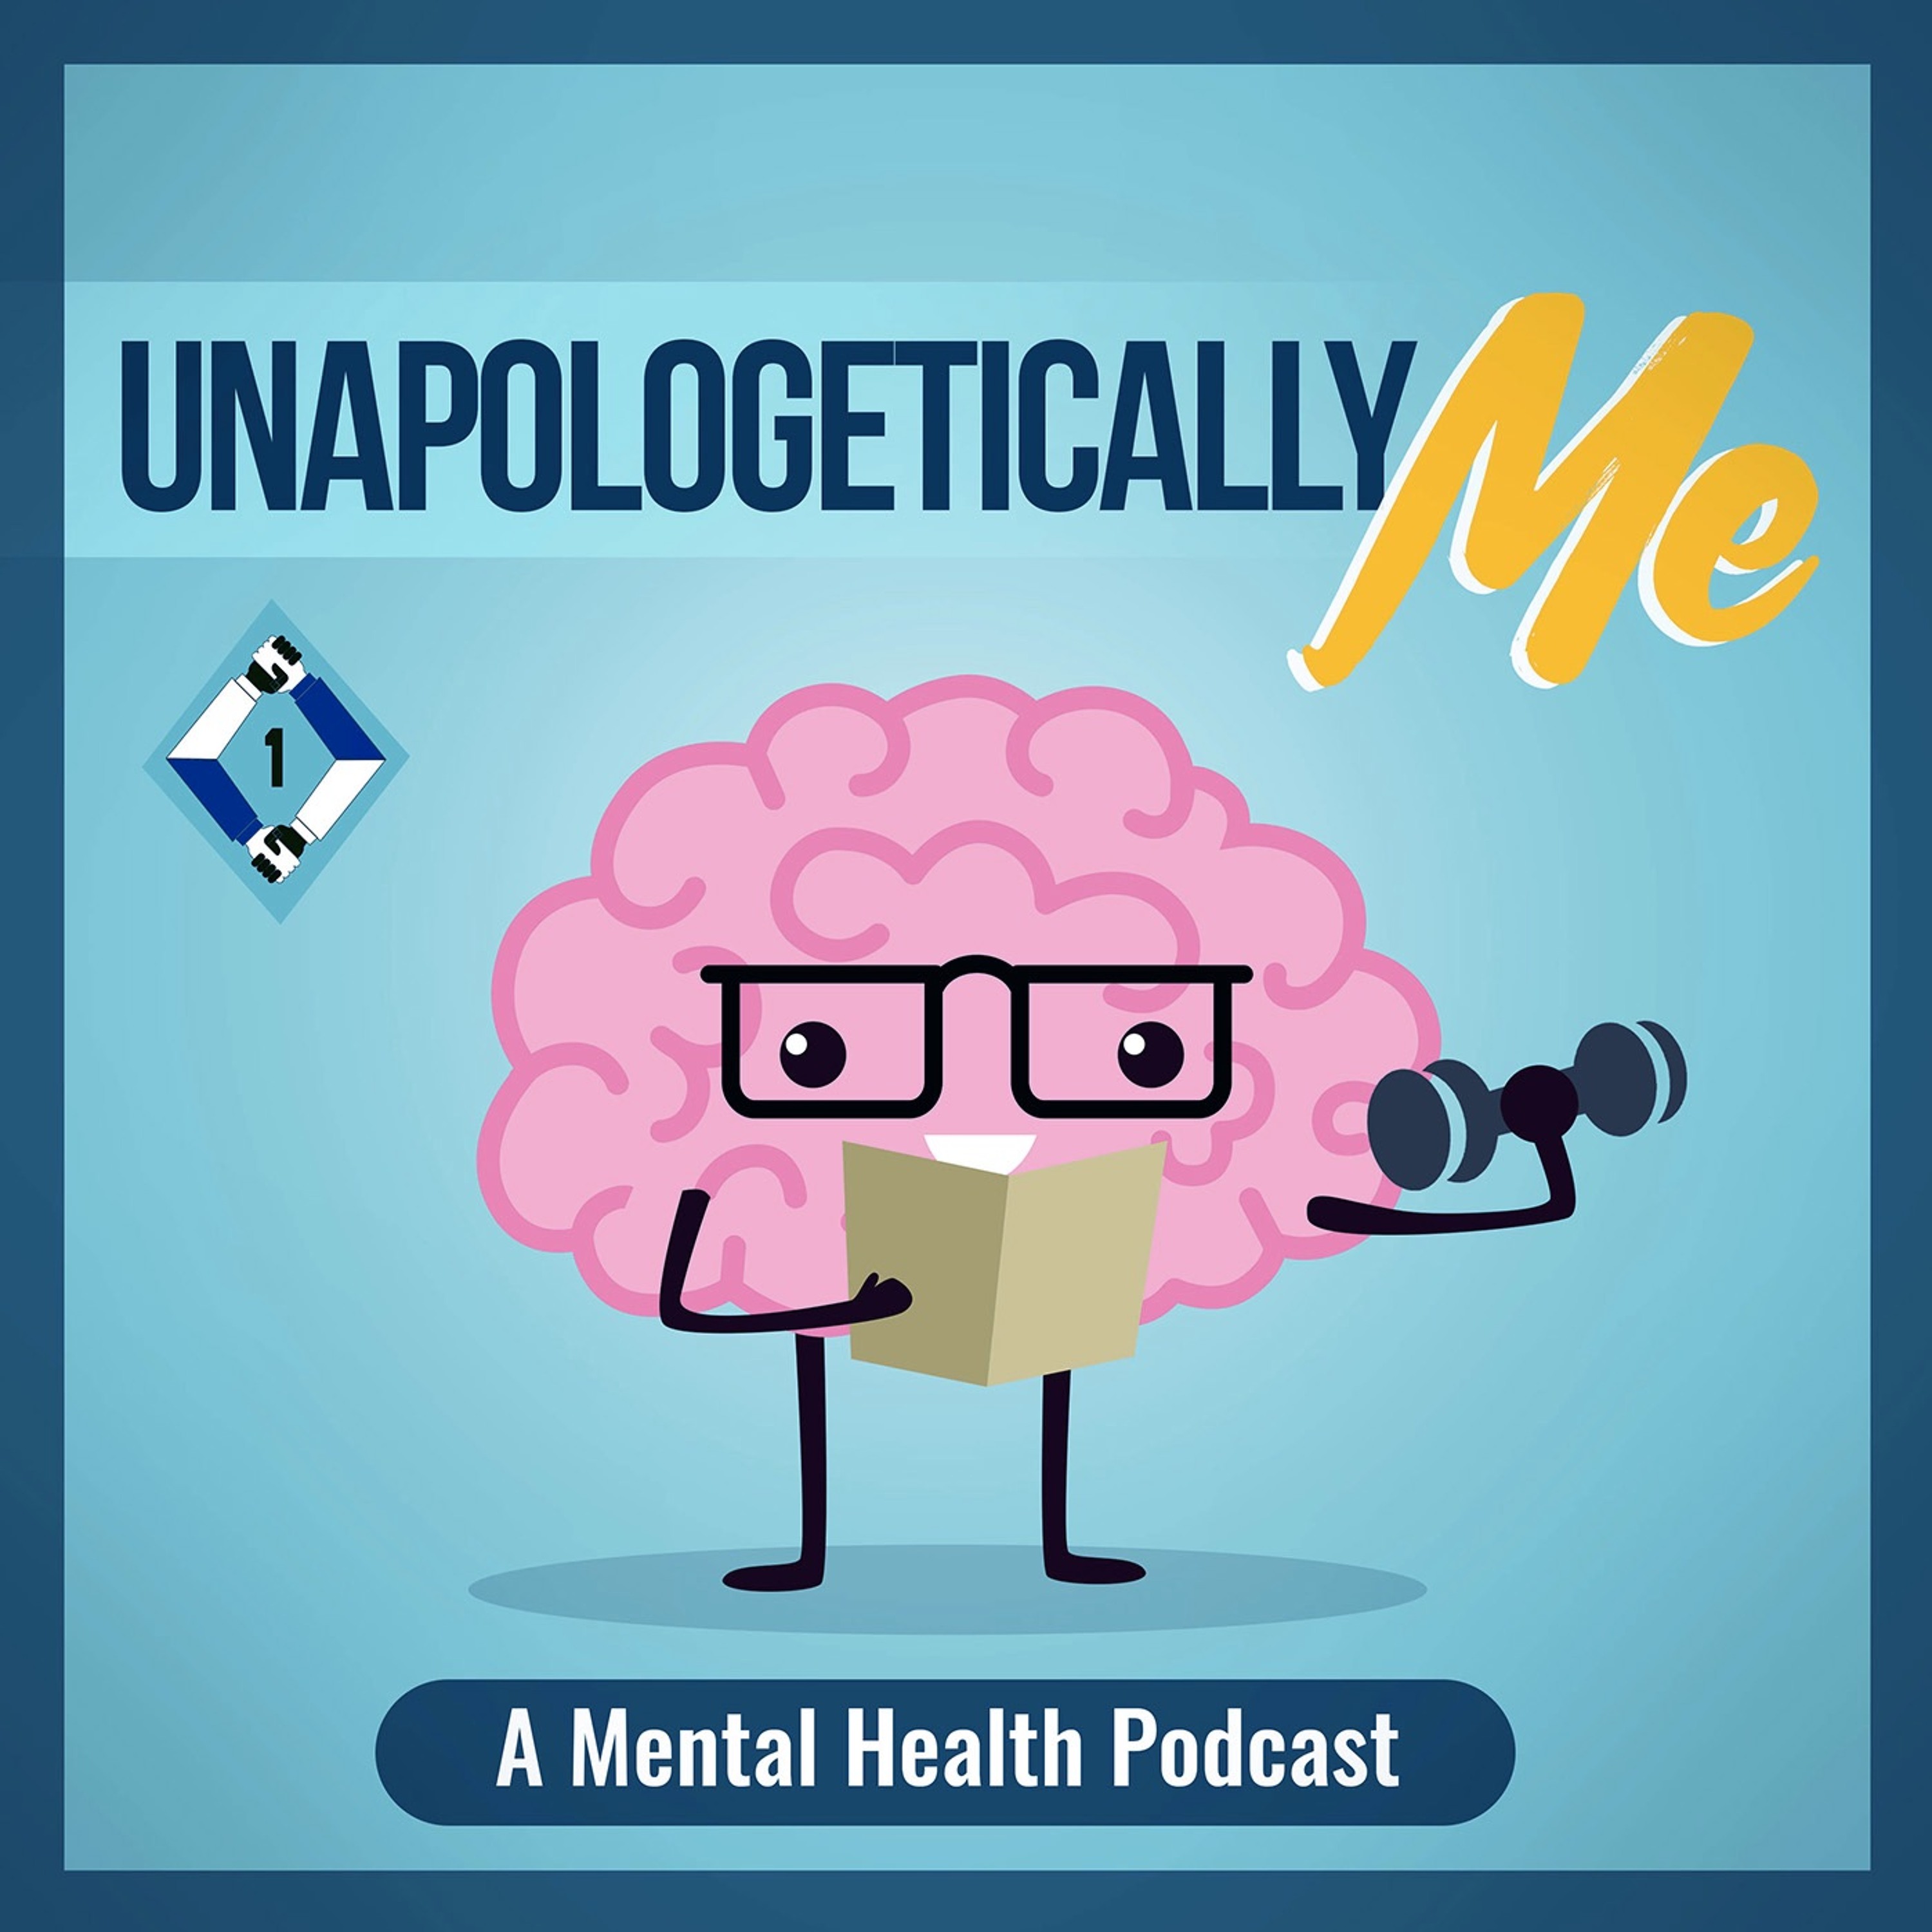 Unapologetically Me: A Mental Health Podcast - Healing After A Traumatic Relationship